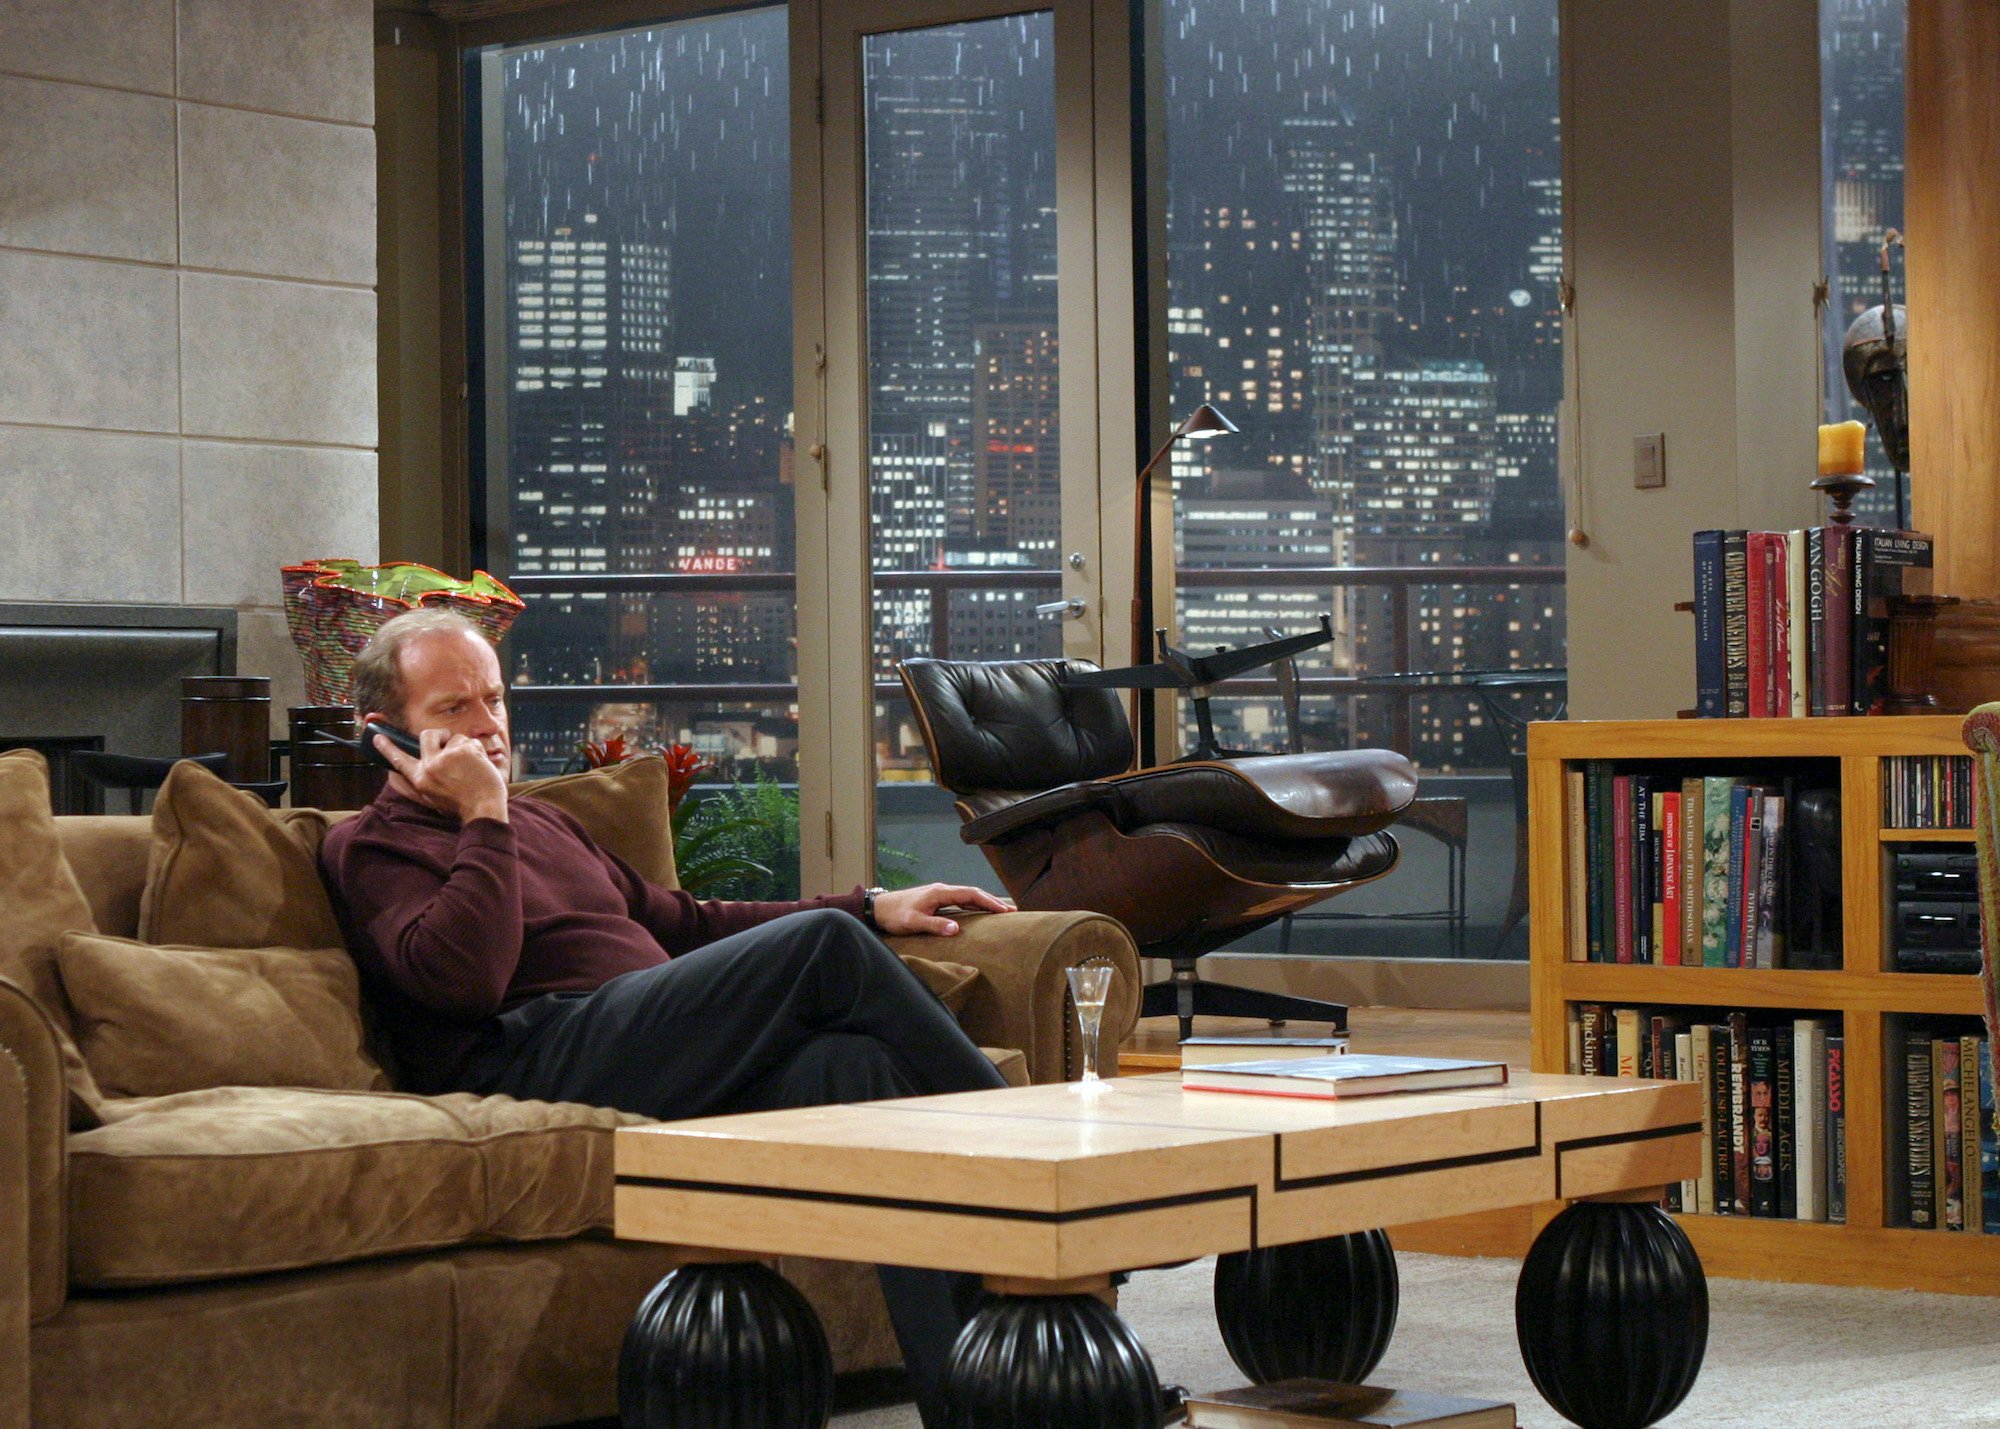 Kelsey Grammer as Dr. Frasier Crane sitting on a couch in front of a cityscape